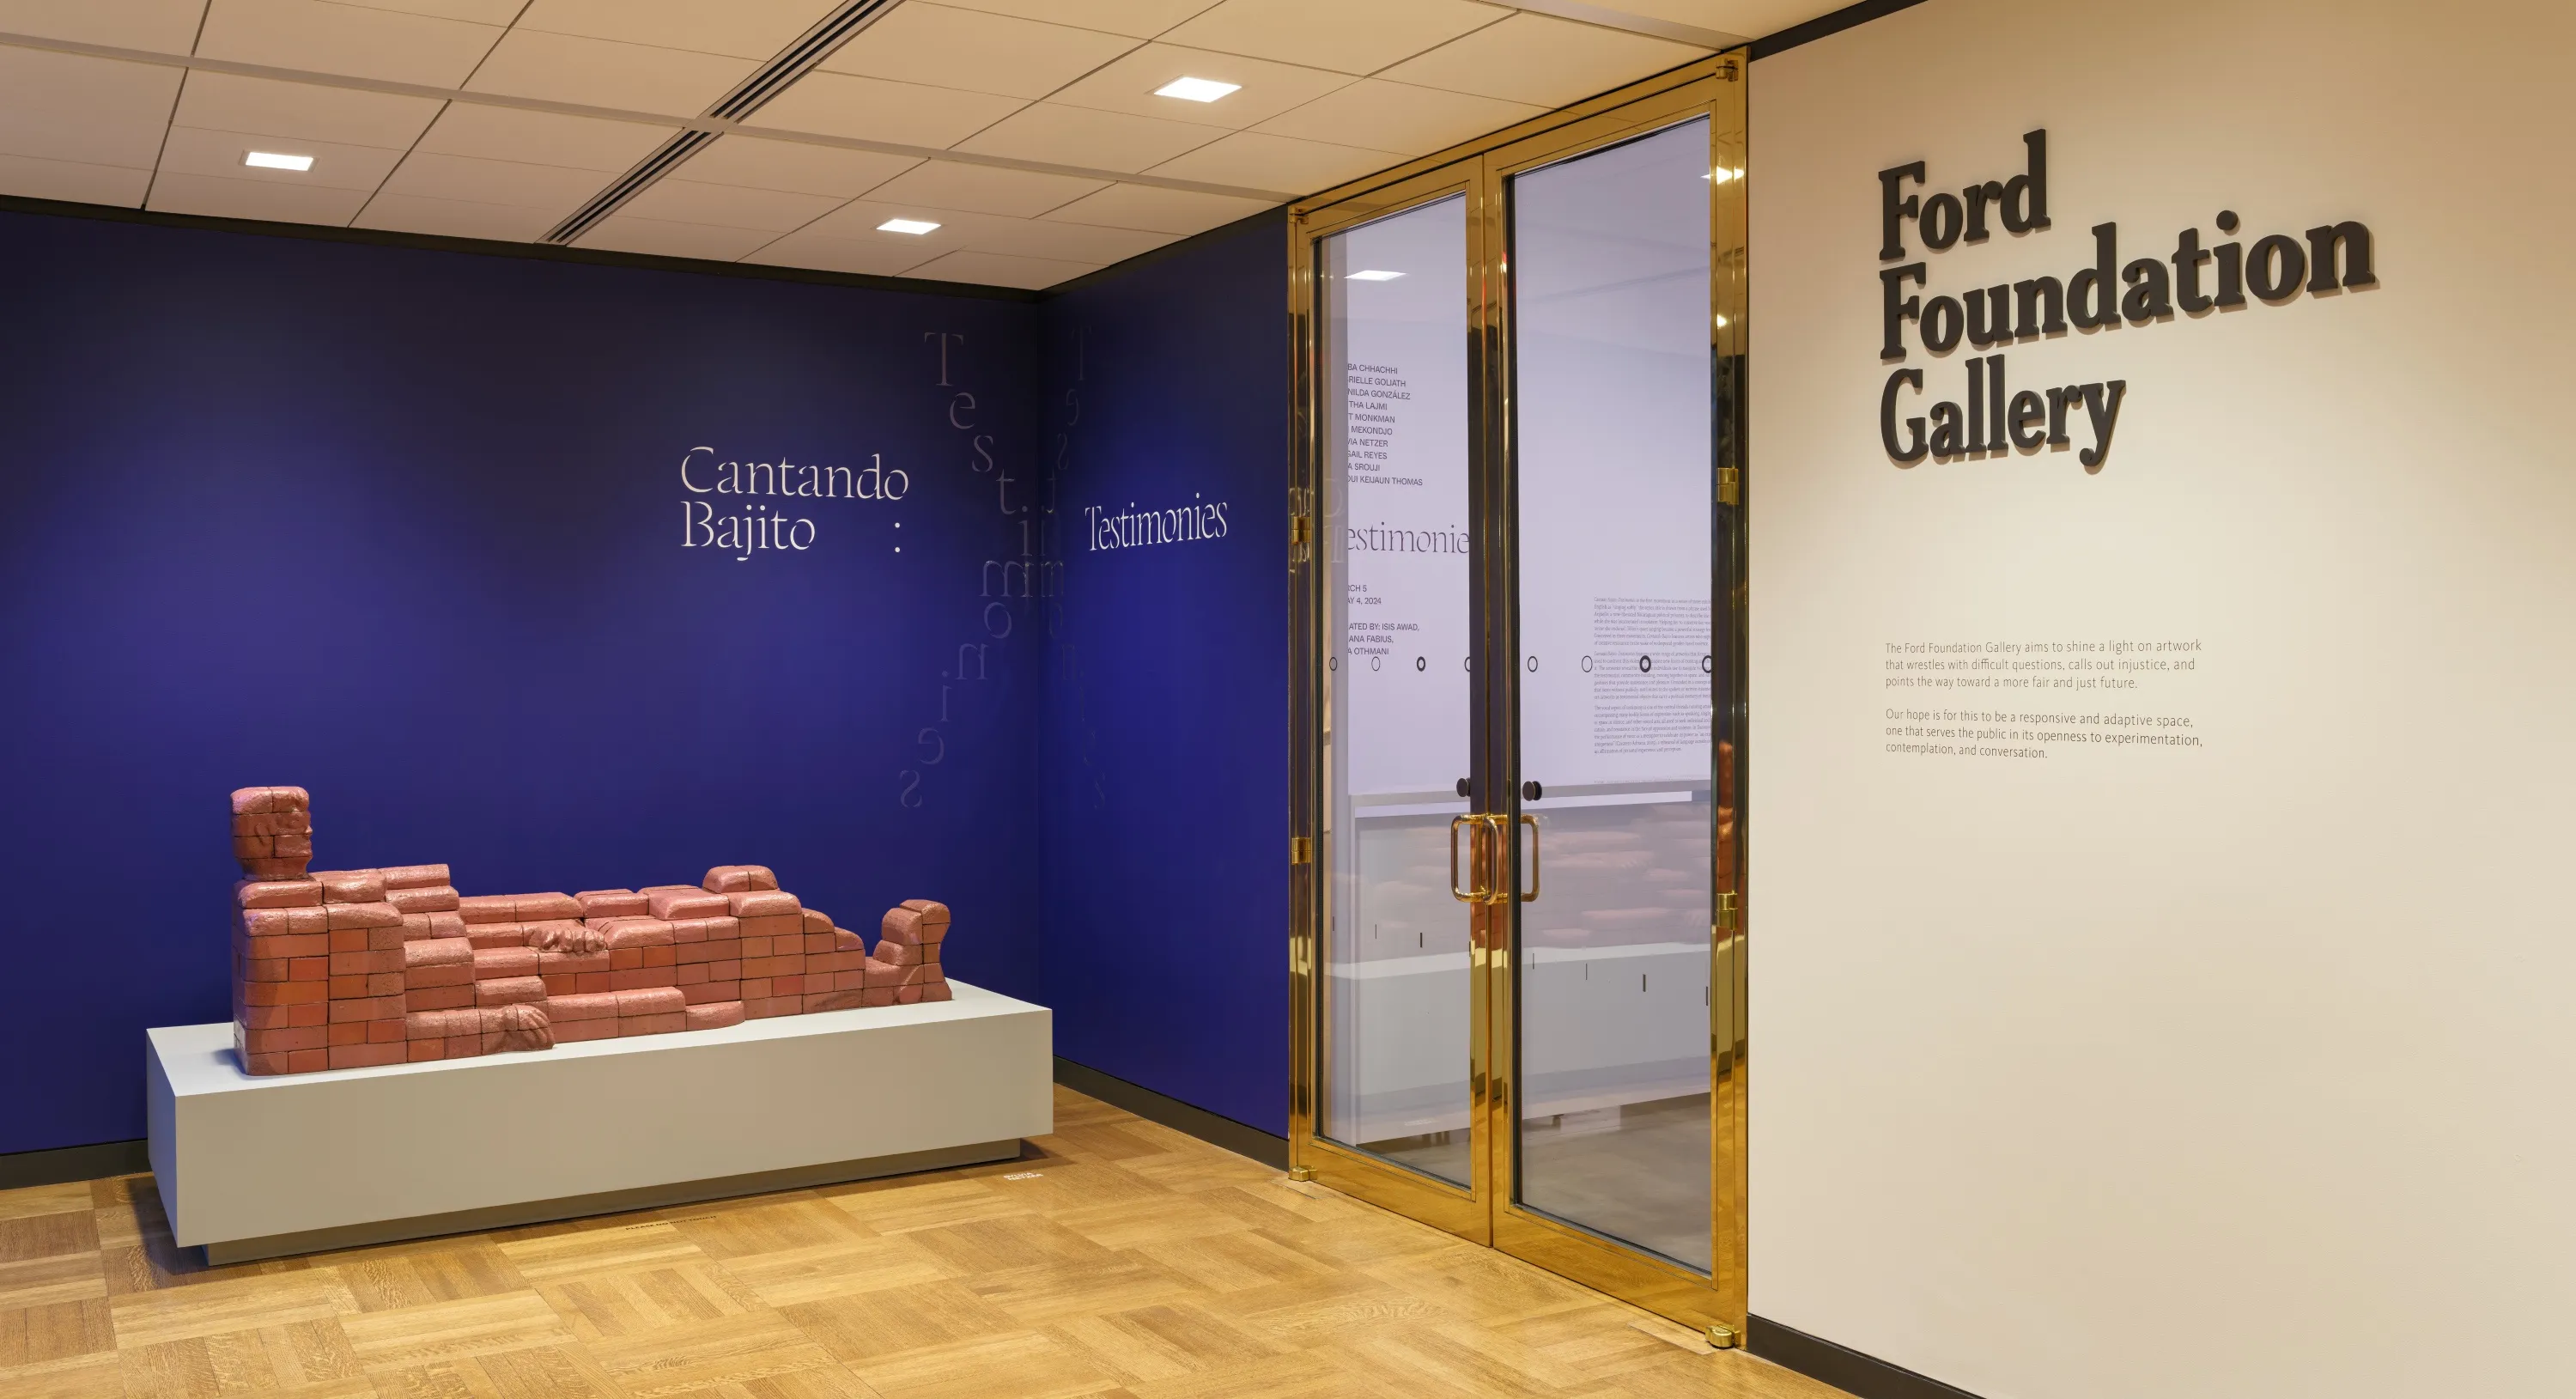 An installation of a brick-lady sculpture on a gray pedestal in front of a dark purple wall with text “Cantando Bajito: Testimonies”. To the right of the wall is a gold-metallic door frame; and a white wall with some text, titled with the header “Ford Foundation Gallery”.